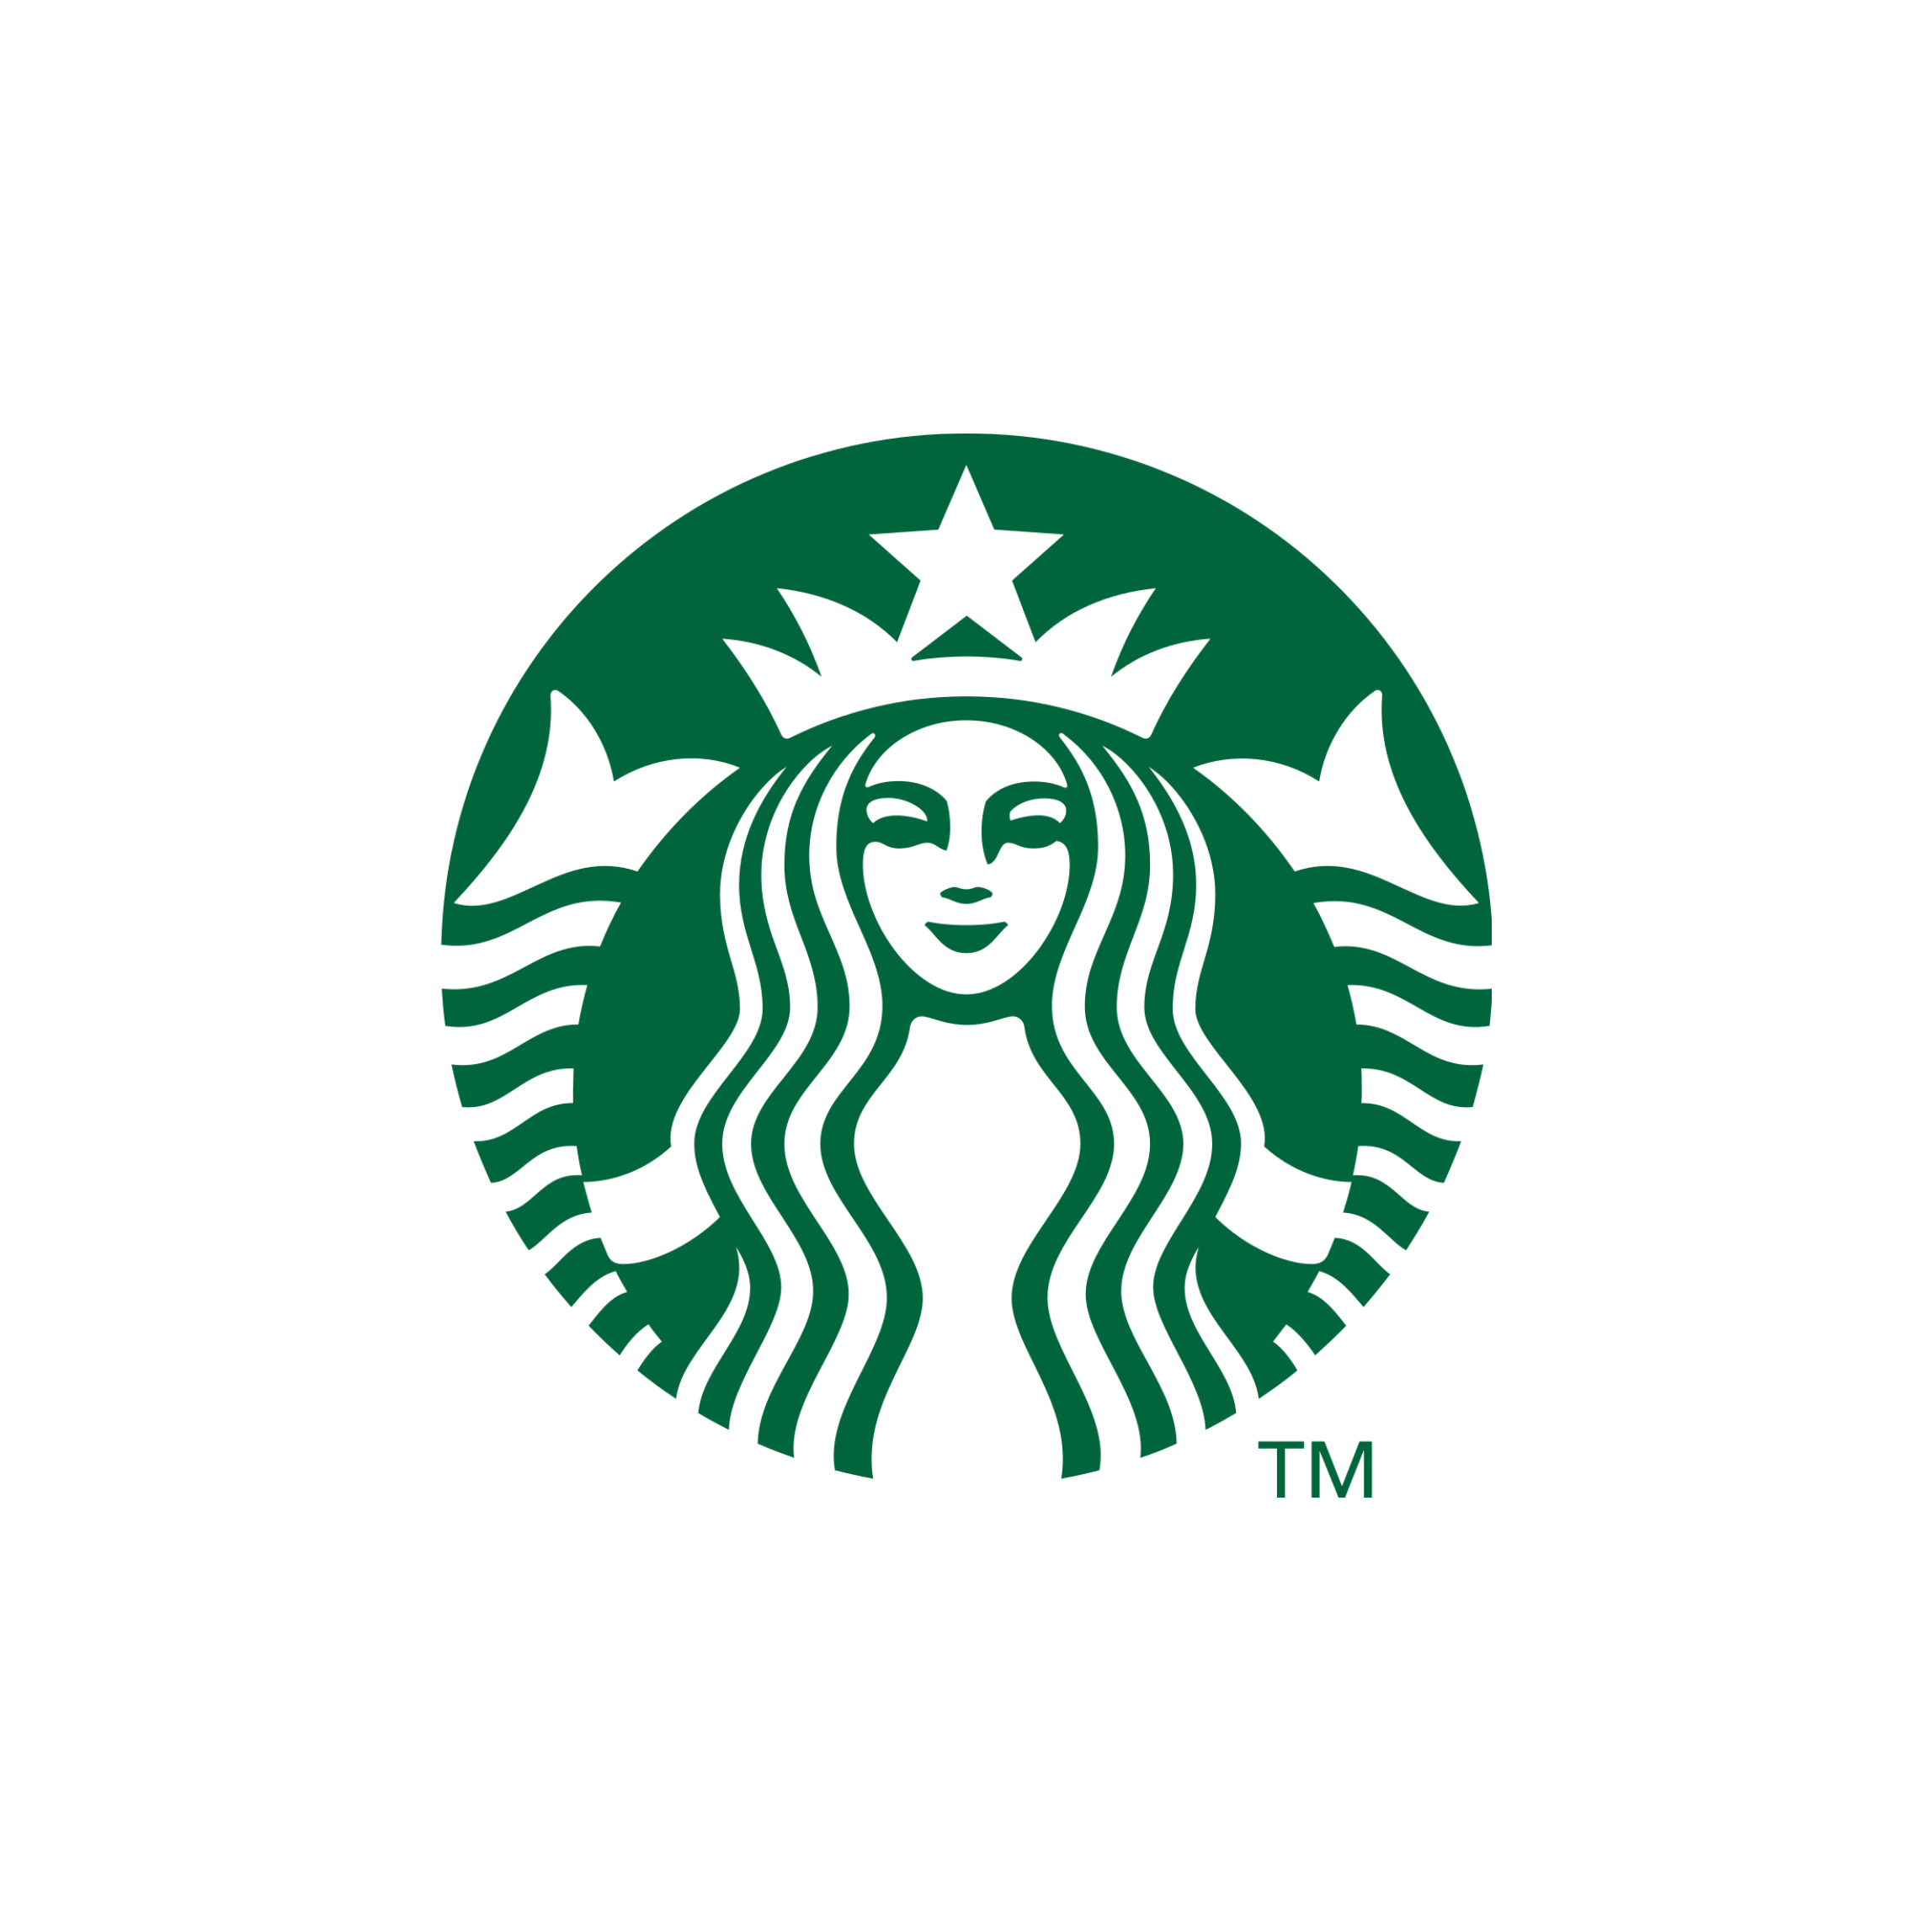 Tessier-employment-icons-Starbucks.png